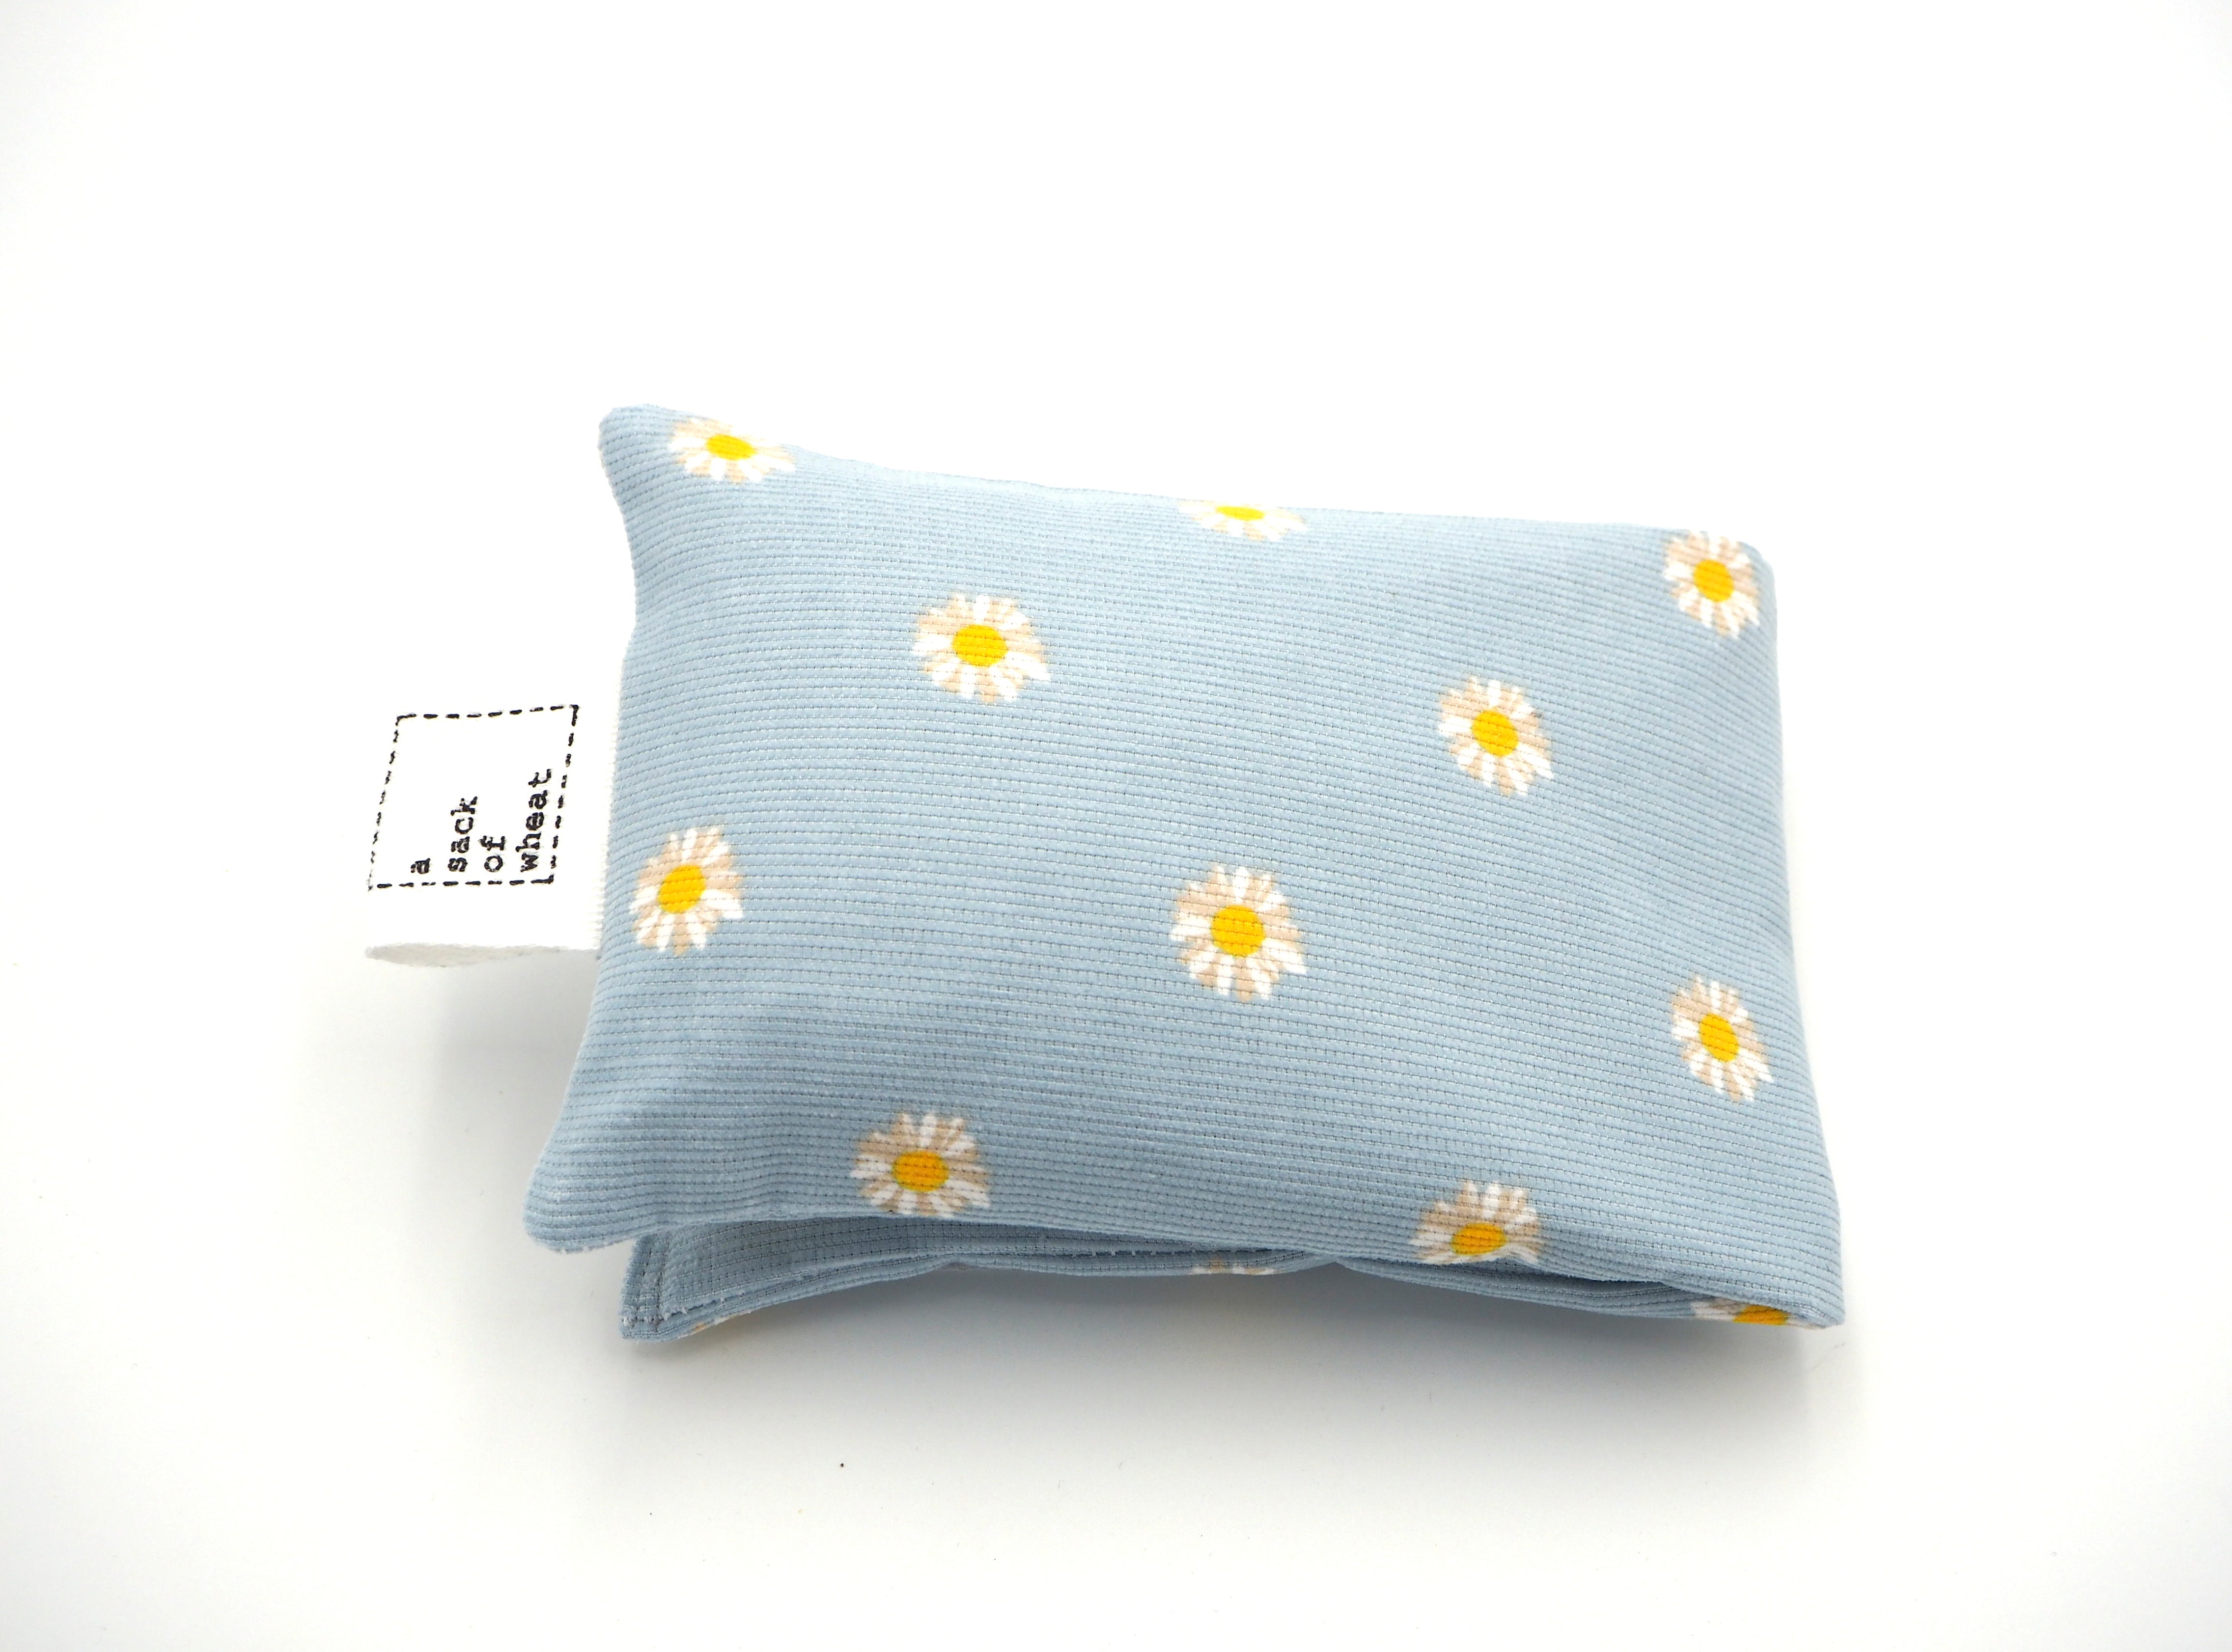 Folded view of A Sack Of Wheat, featuring soft yellow, spring daisy's on baby blue corduroy 100% cotton fabric